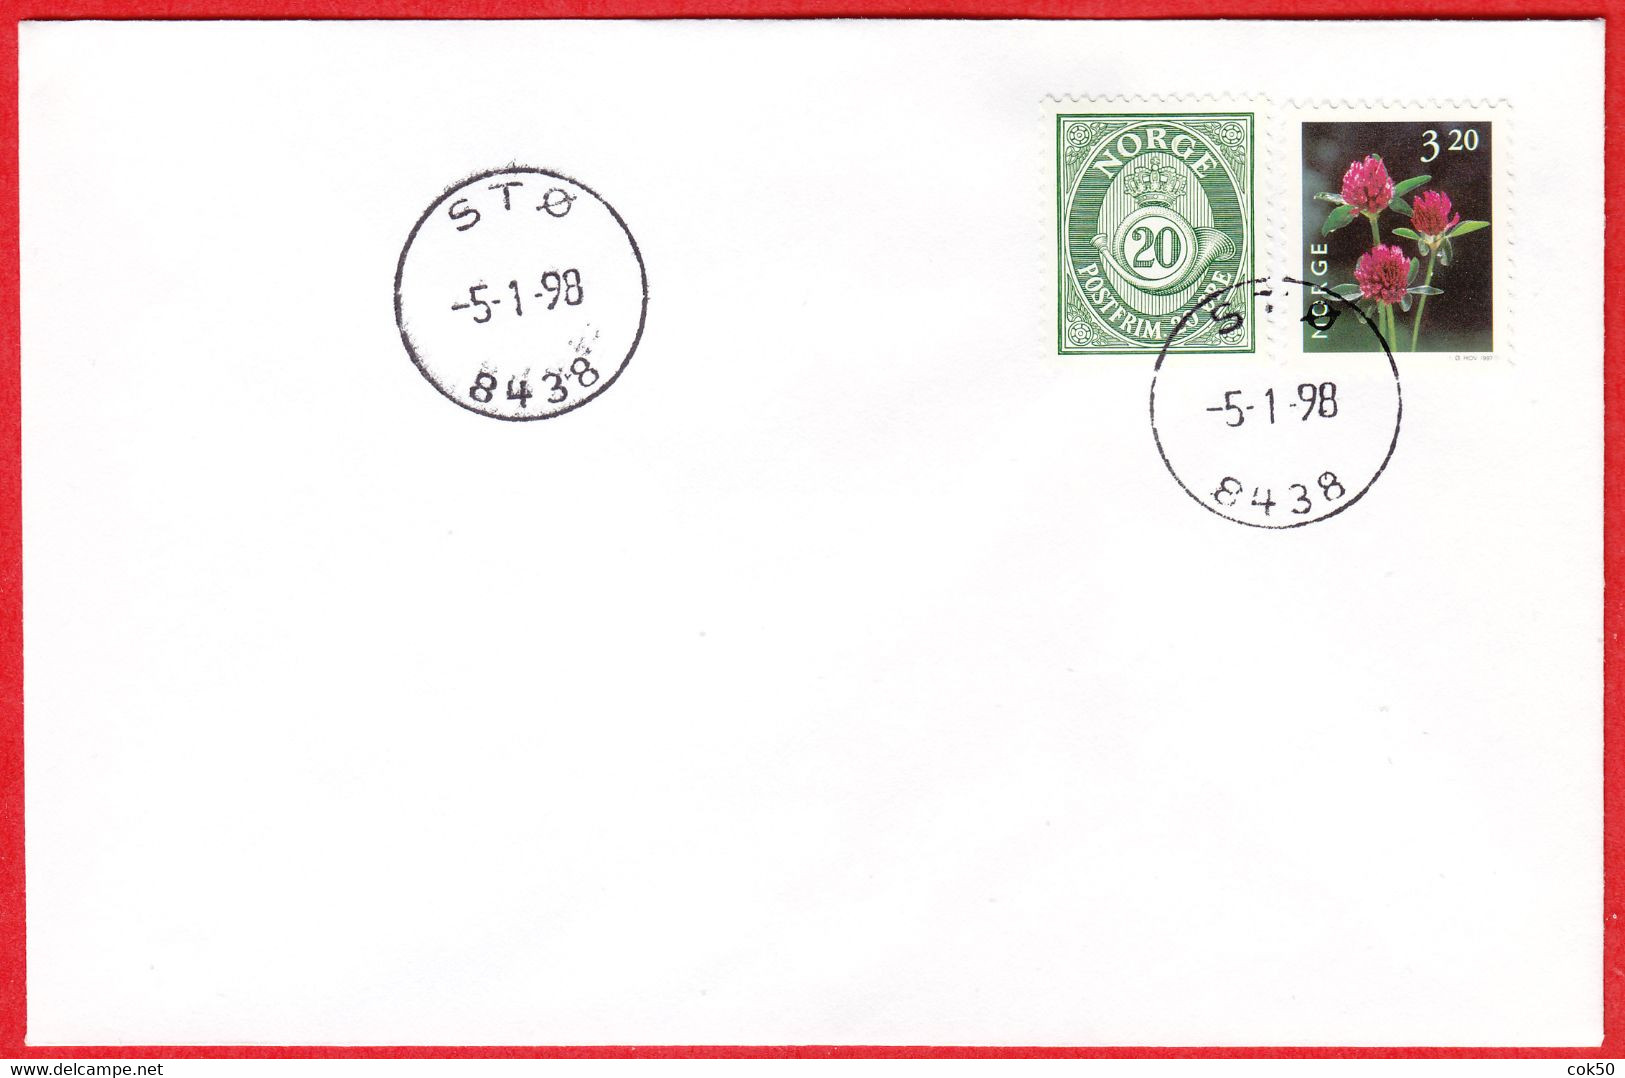 NORWAY -  8438 STØ (Nordland County) - Last Day/postoffice Closed On 1998.01.05 - Local Post Stamps